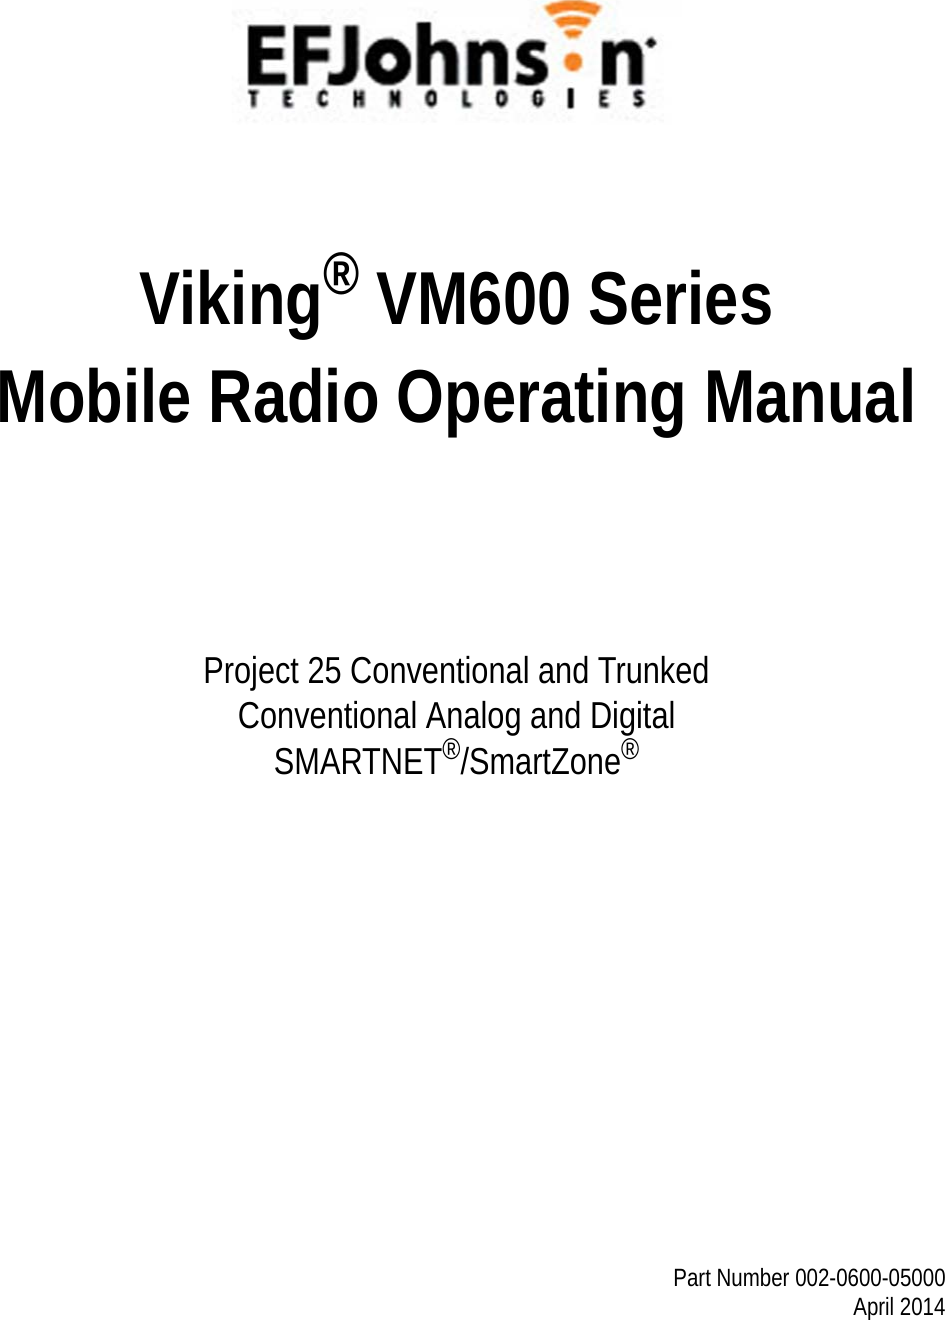 Viking® VM600 Series Mobile Radio Operating ManualProject 25 Conventional and TrunkedConventional Analog and DigitalSMARTNET®/SmartZone®Part Number 002-0600-05000April 2014Draft 4/29/2014